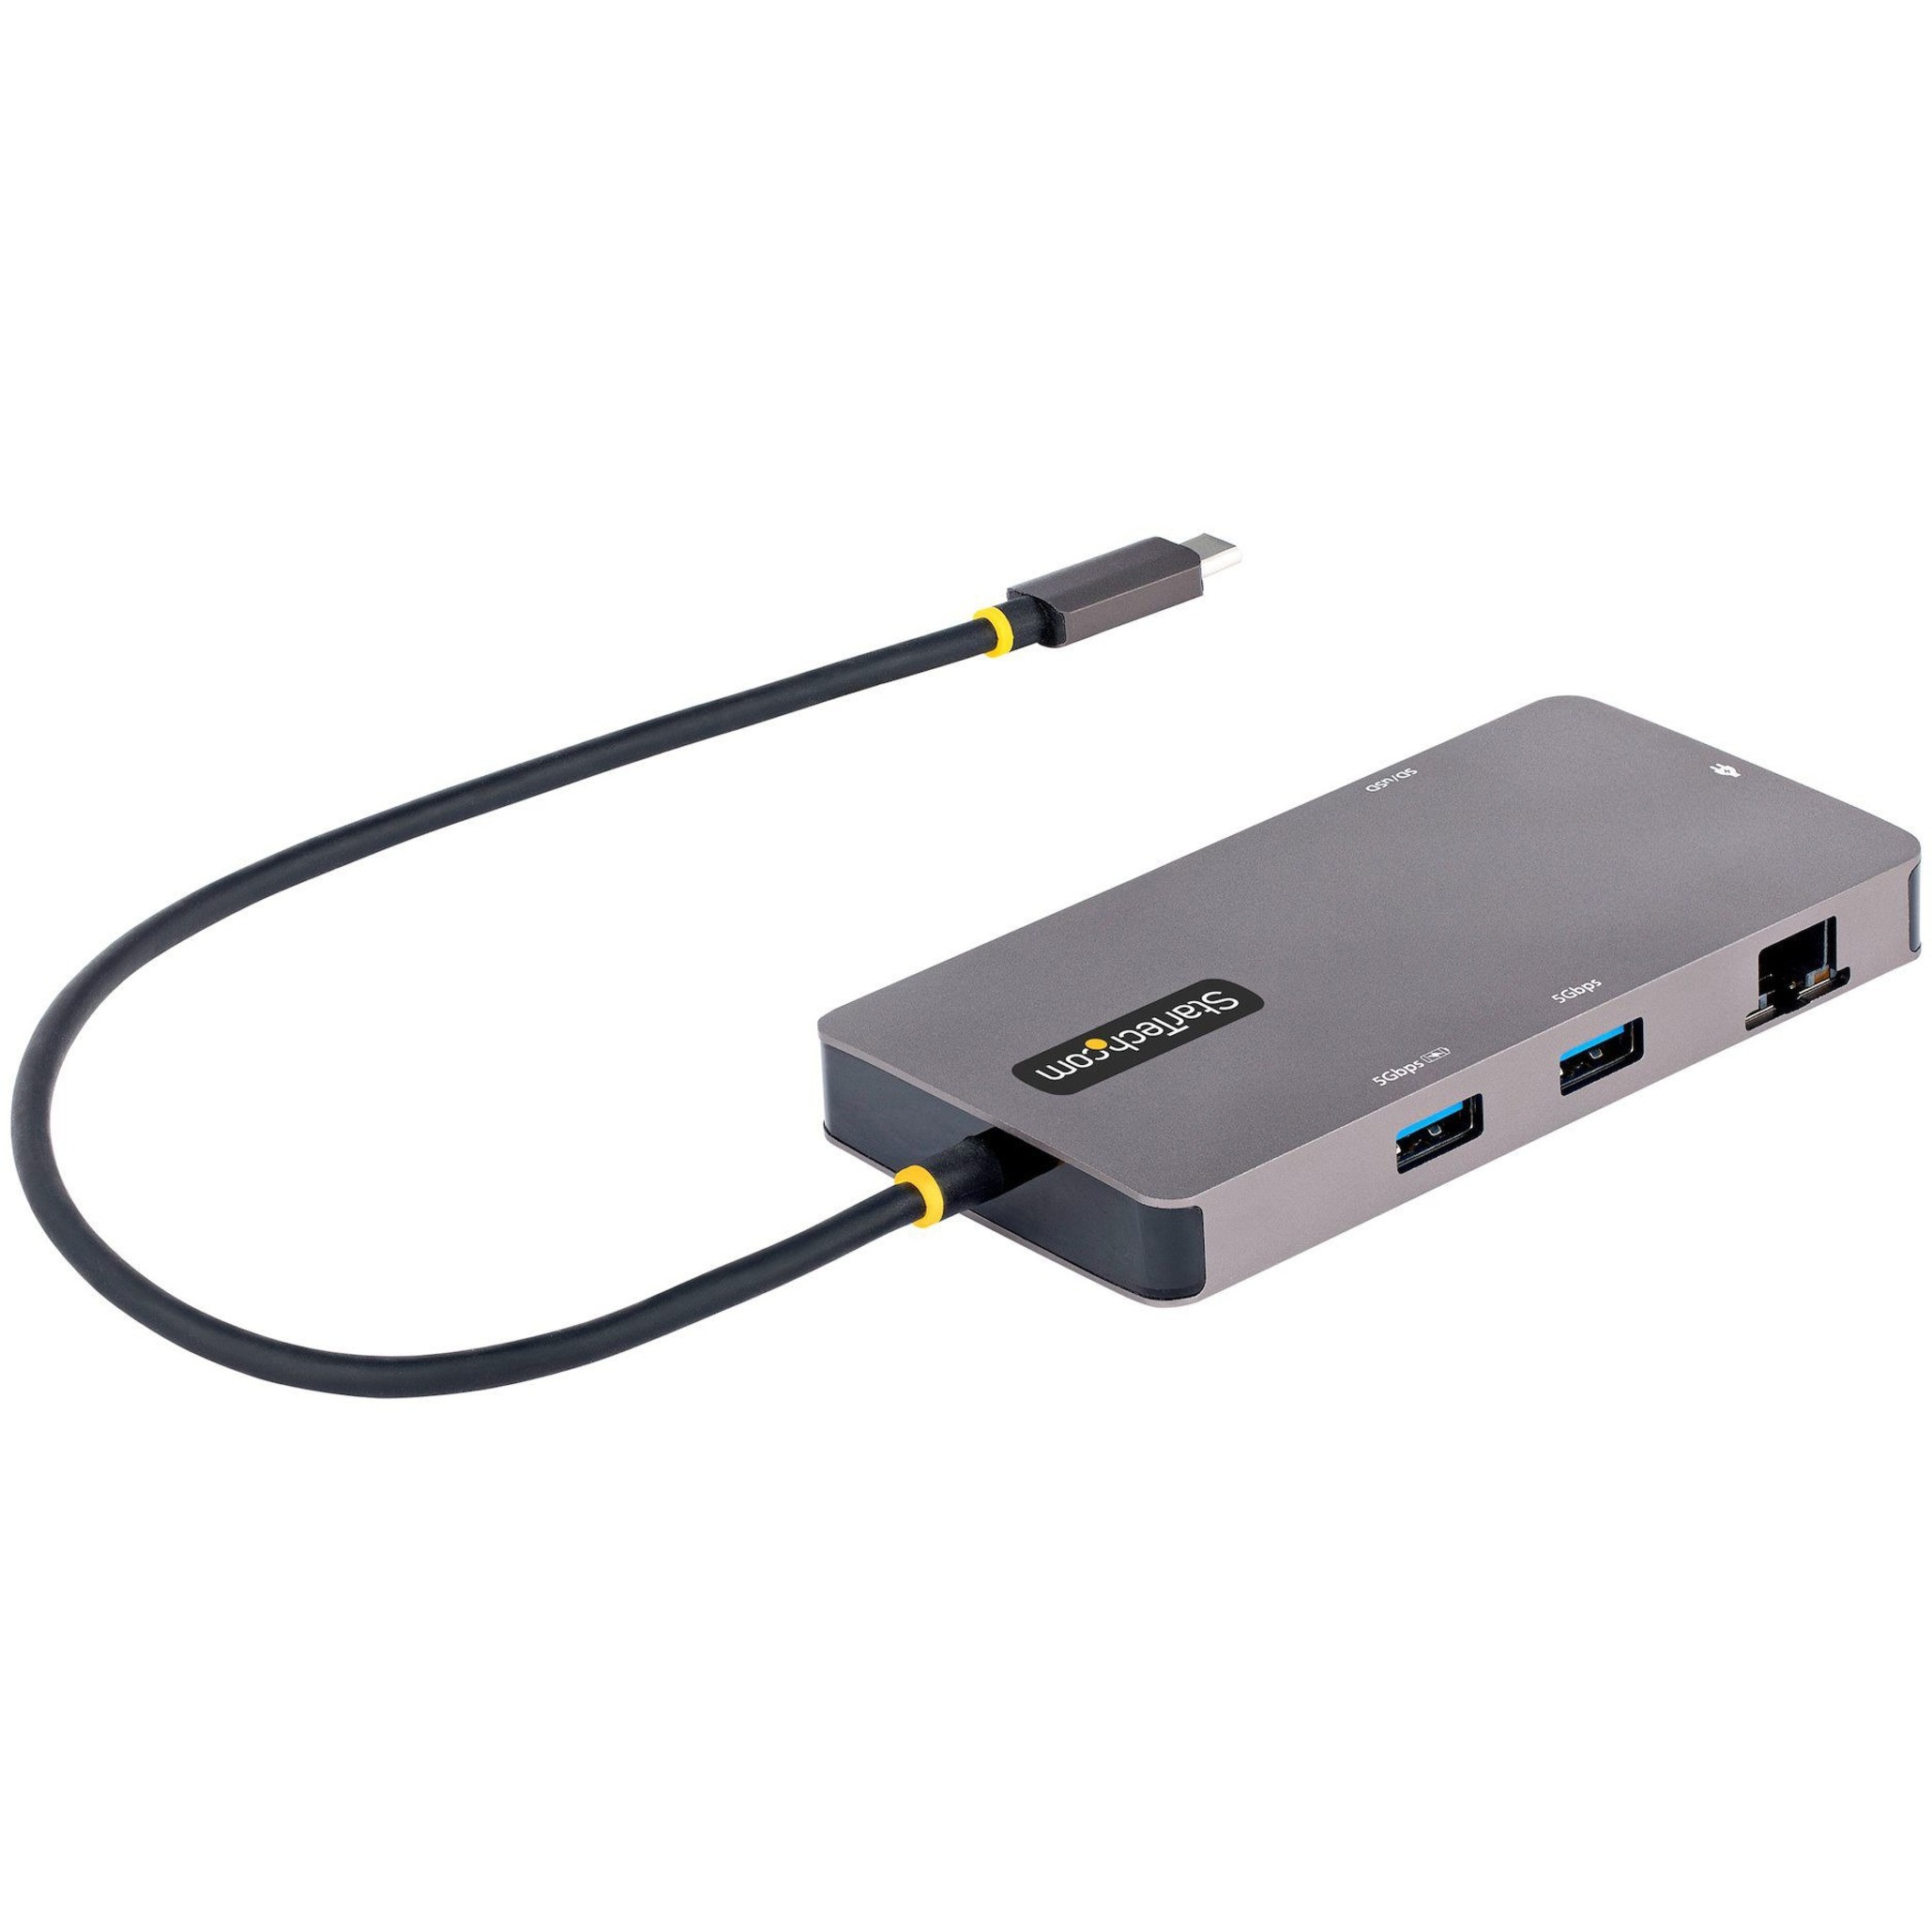 USB-C to HDMI, USB-A and USB-C Multiport Adapter